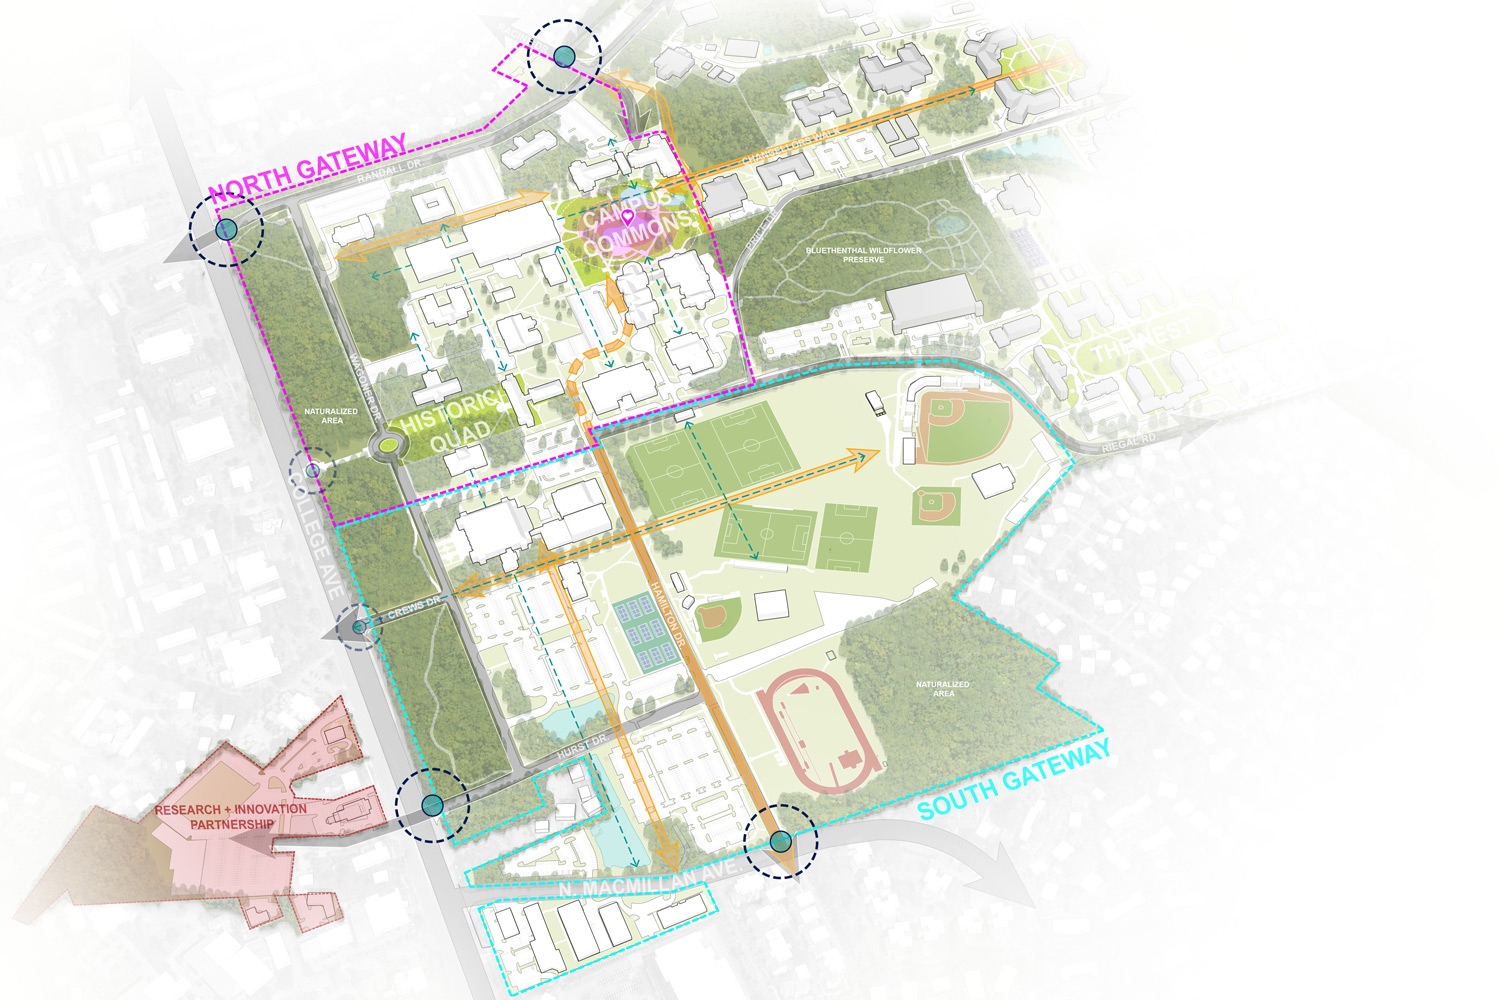 3-d rendering of the overall master plan